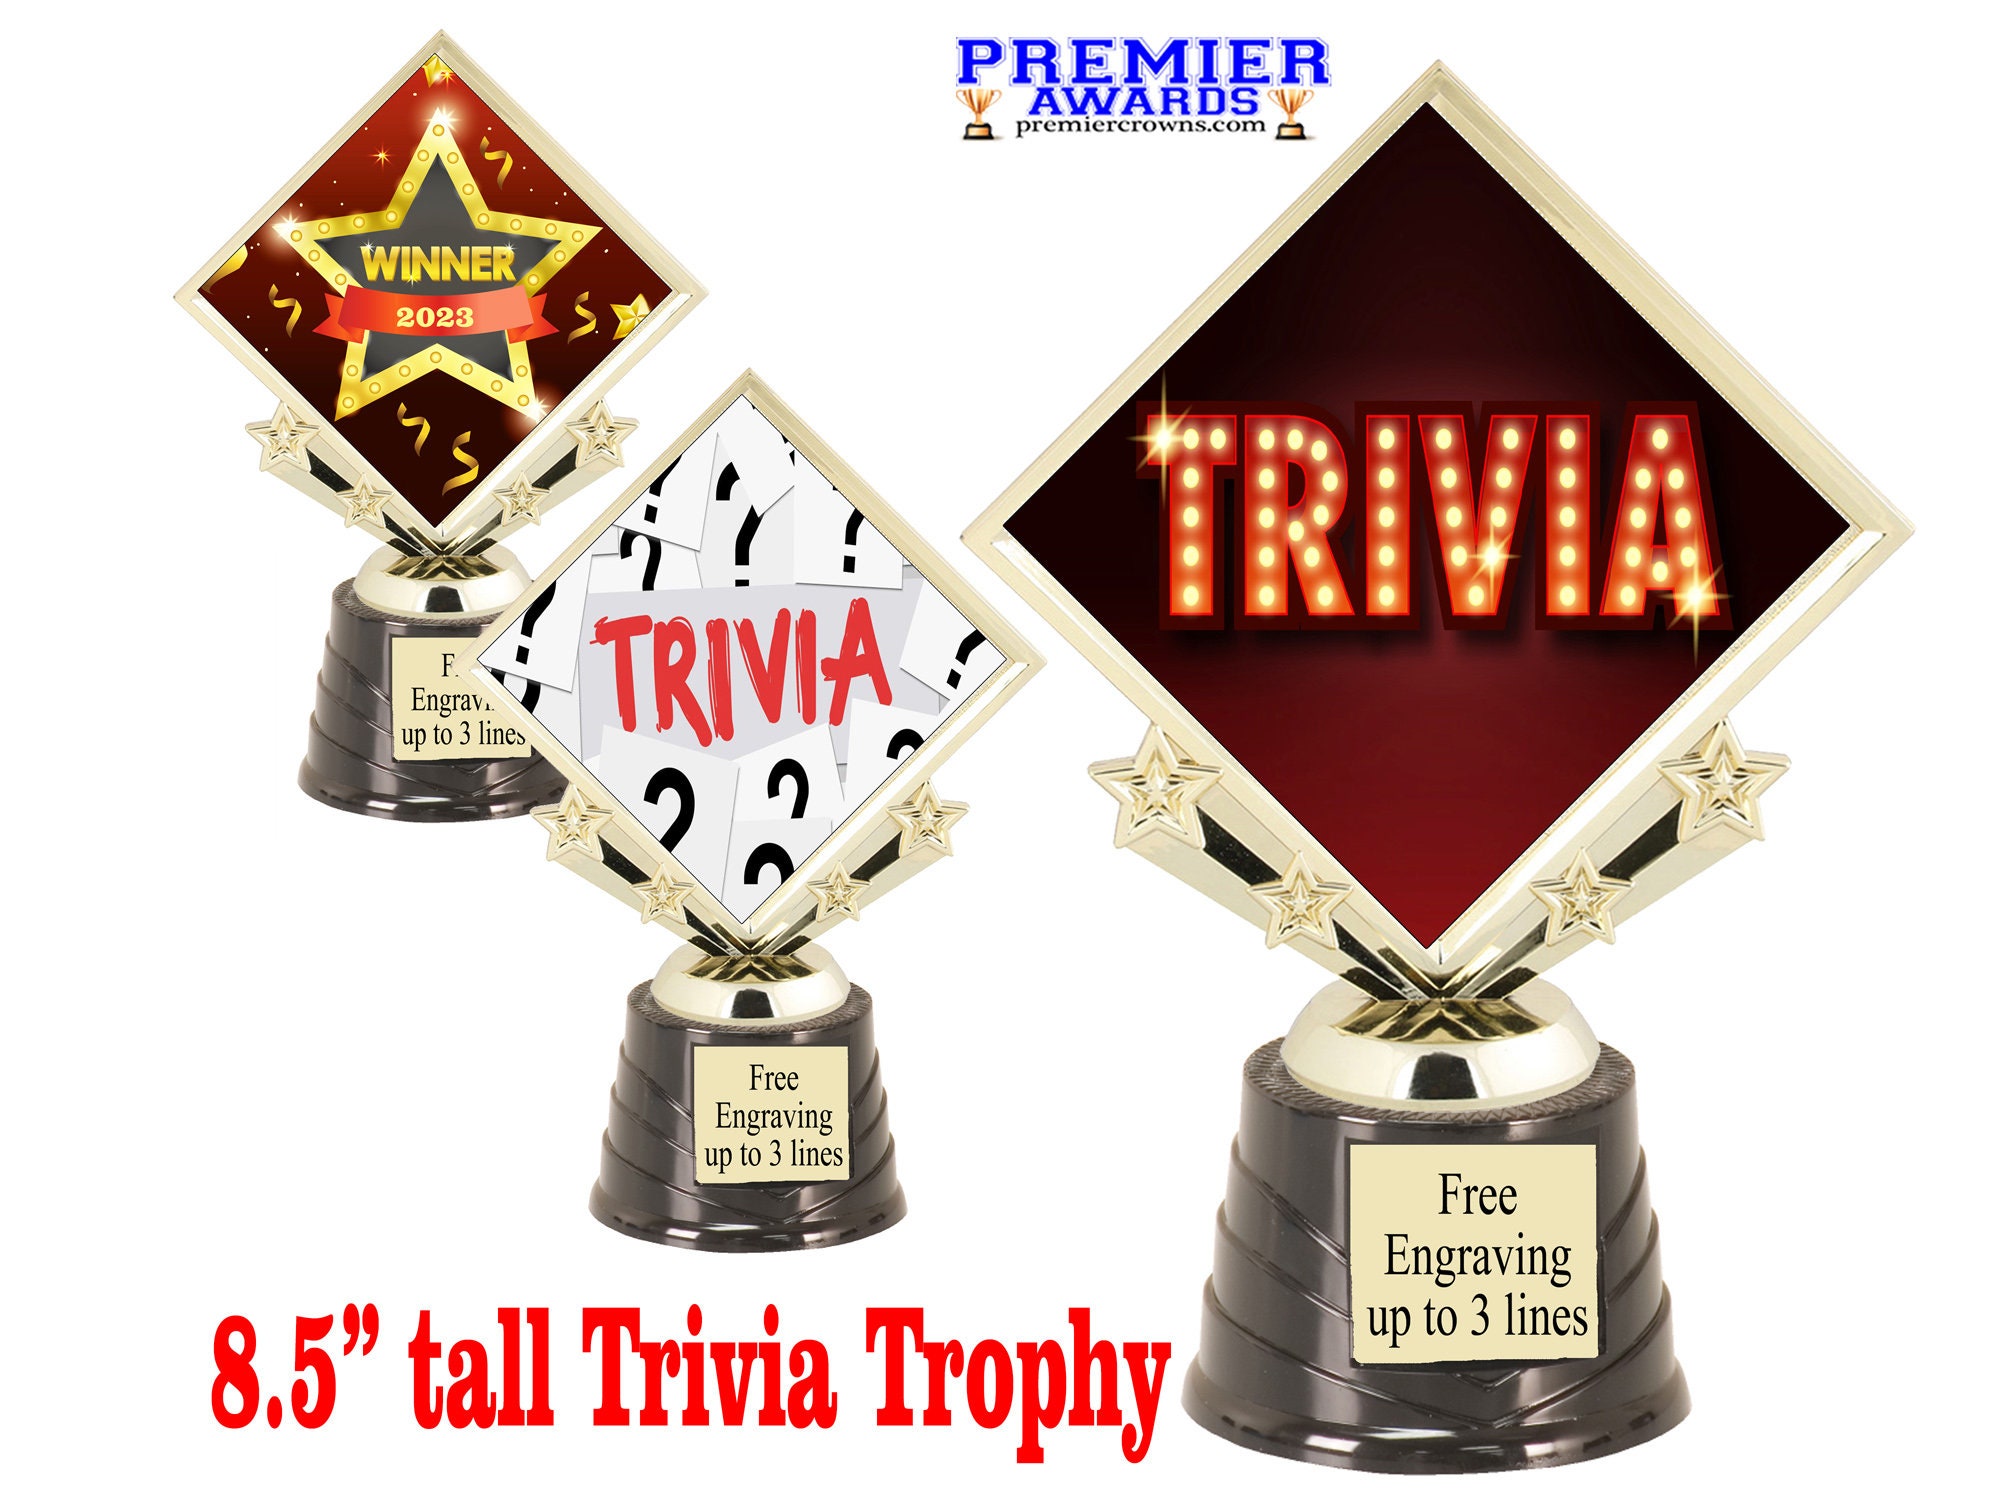 G.O.A.T Greatest of All Time Tall Trophy - Free Engraving, Winner, Great,  Sports, Best, Champion, Trivia, Game, Night, Greatness, Number One